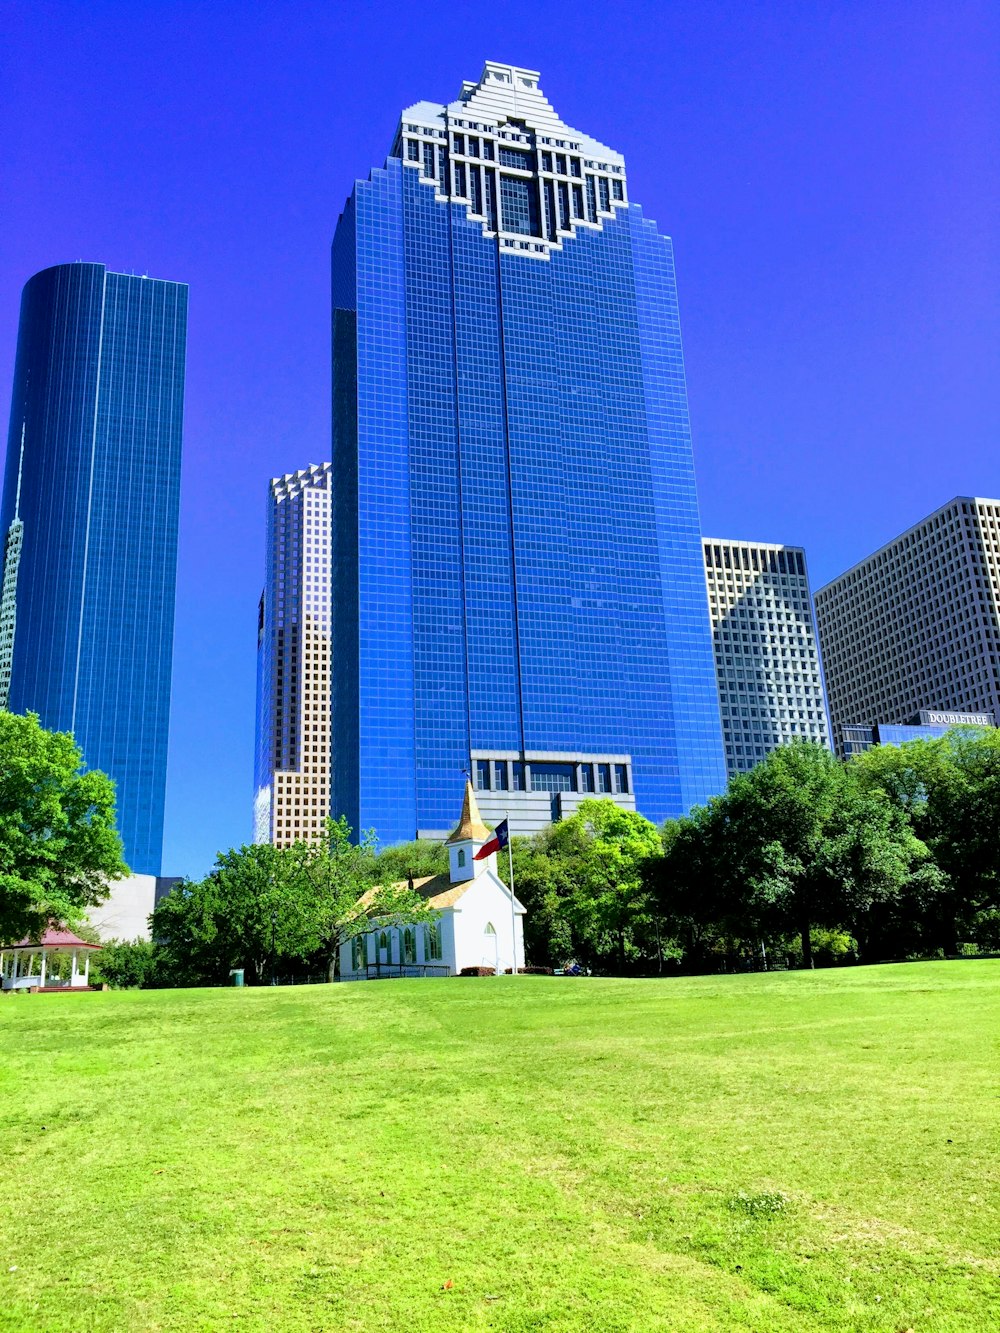 a grassy field with buildings in the background